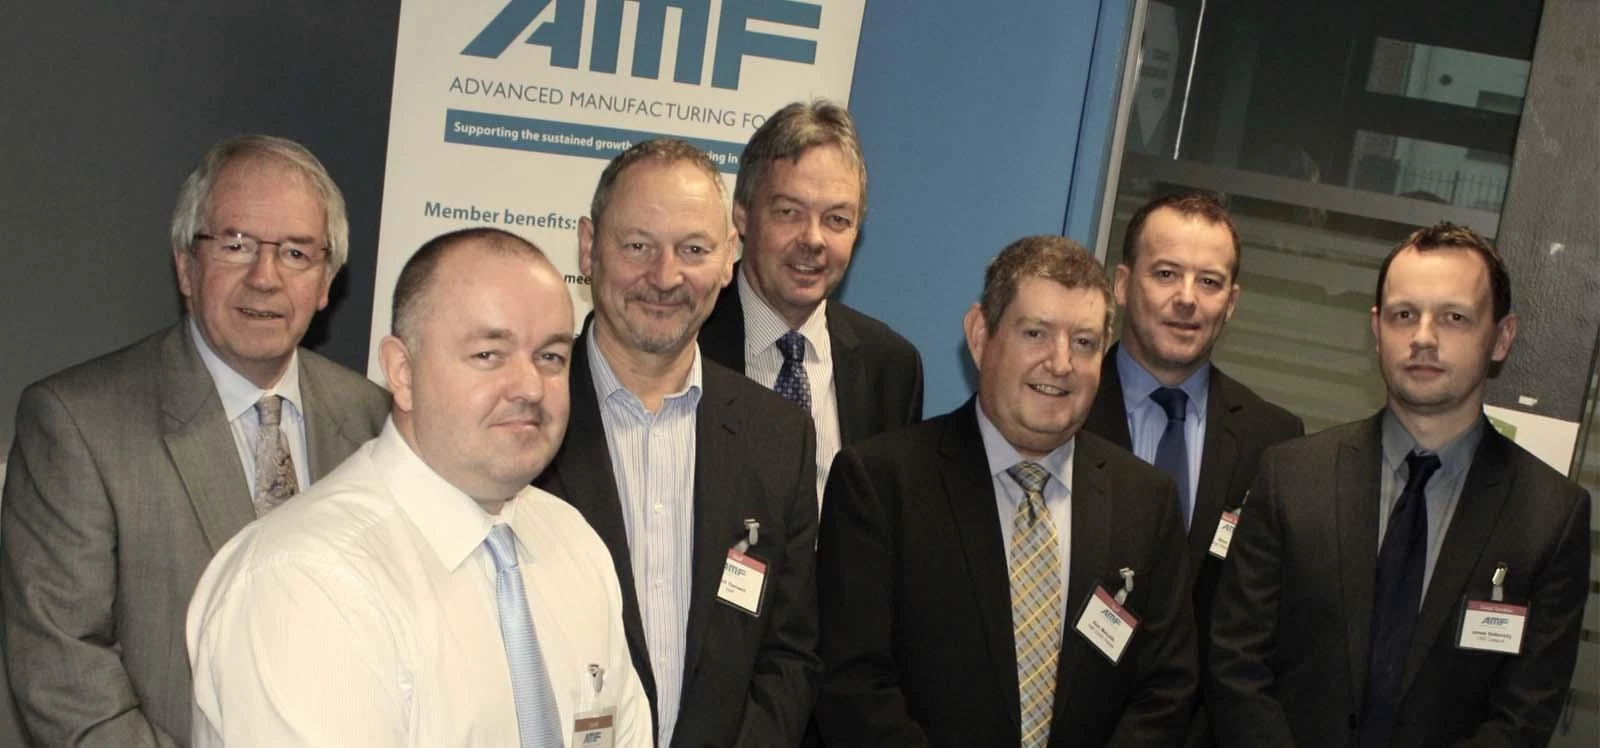 Members of AMF at a previous event.